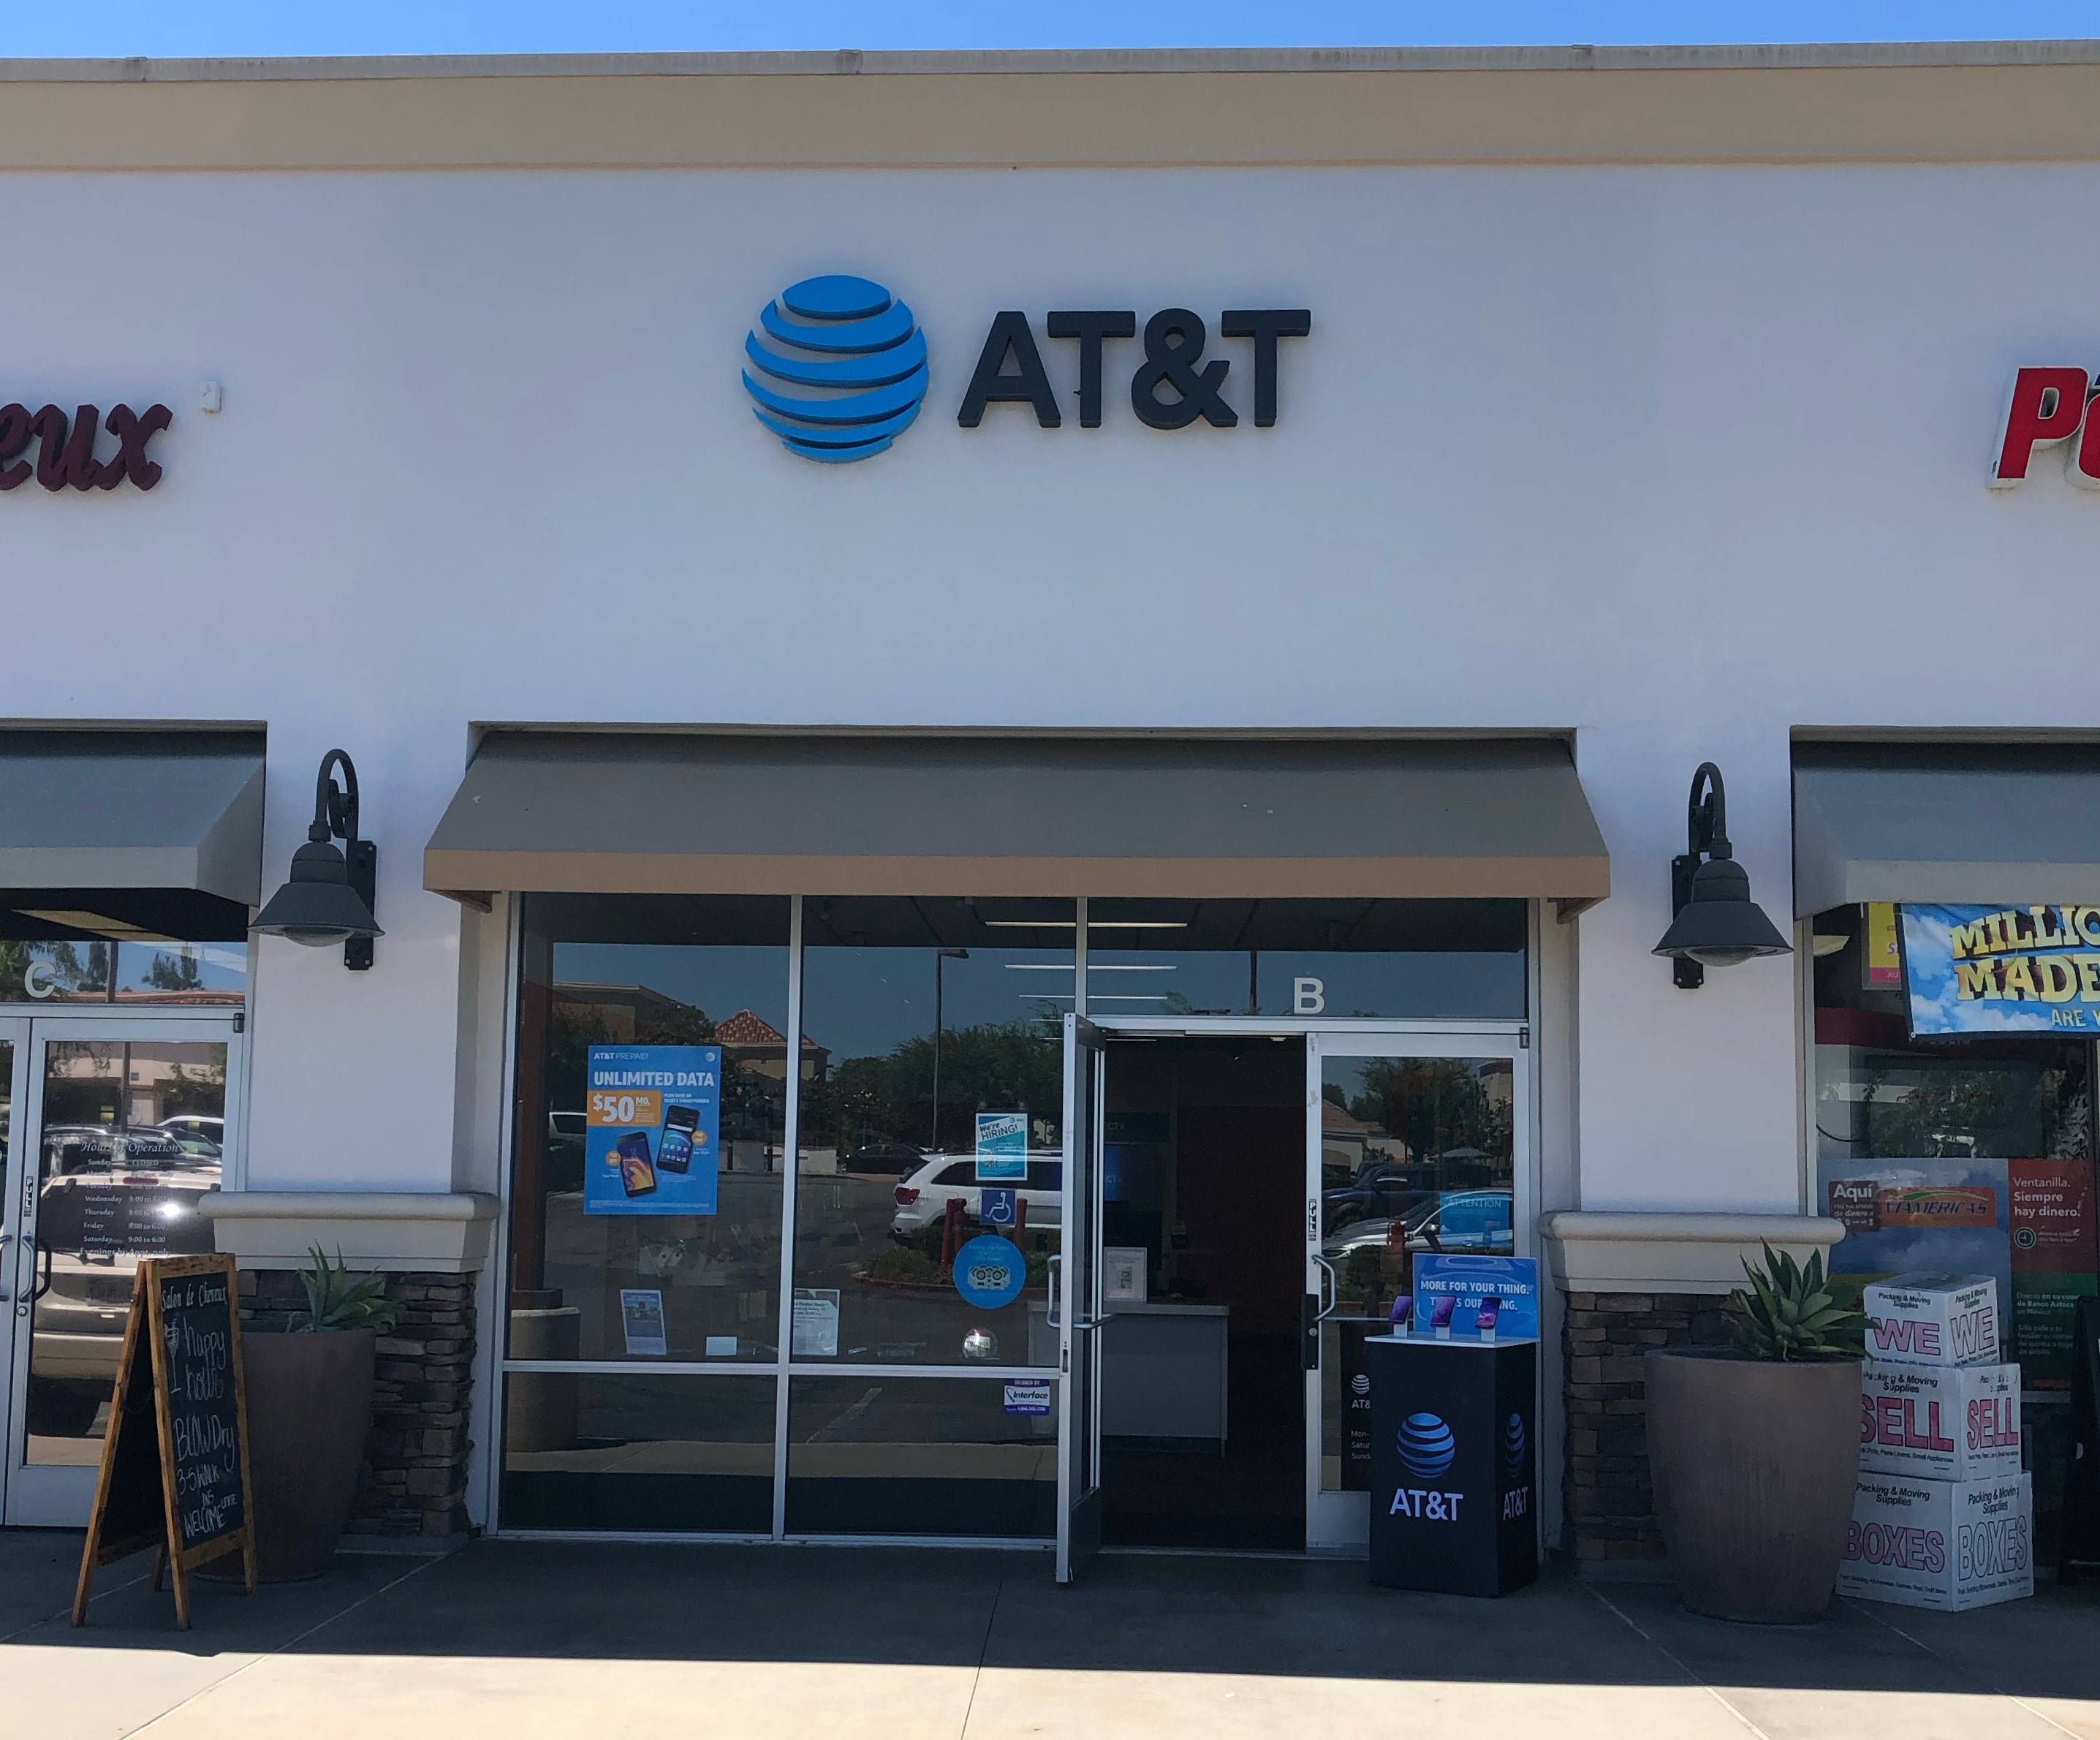 AT&T Store Coupons near me in Temecula, CA 92592 | 8coupons